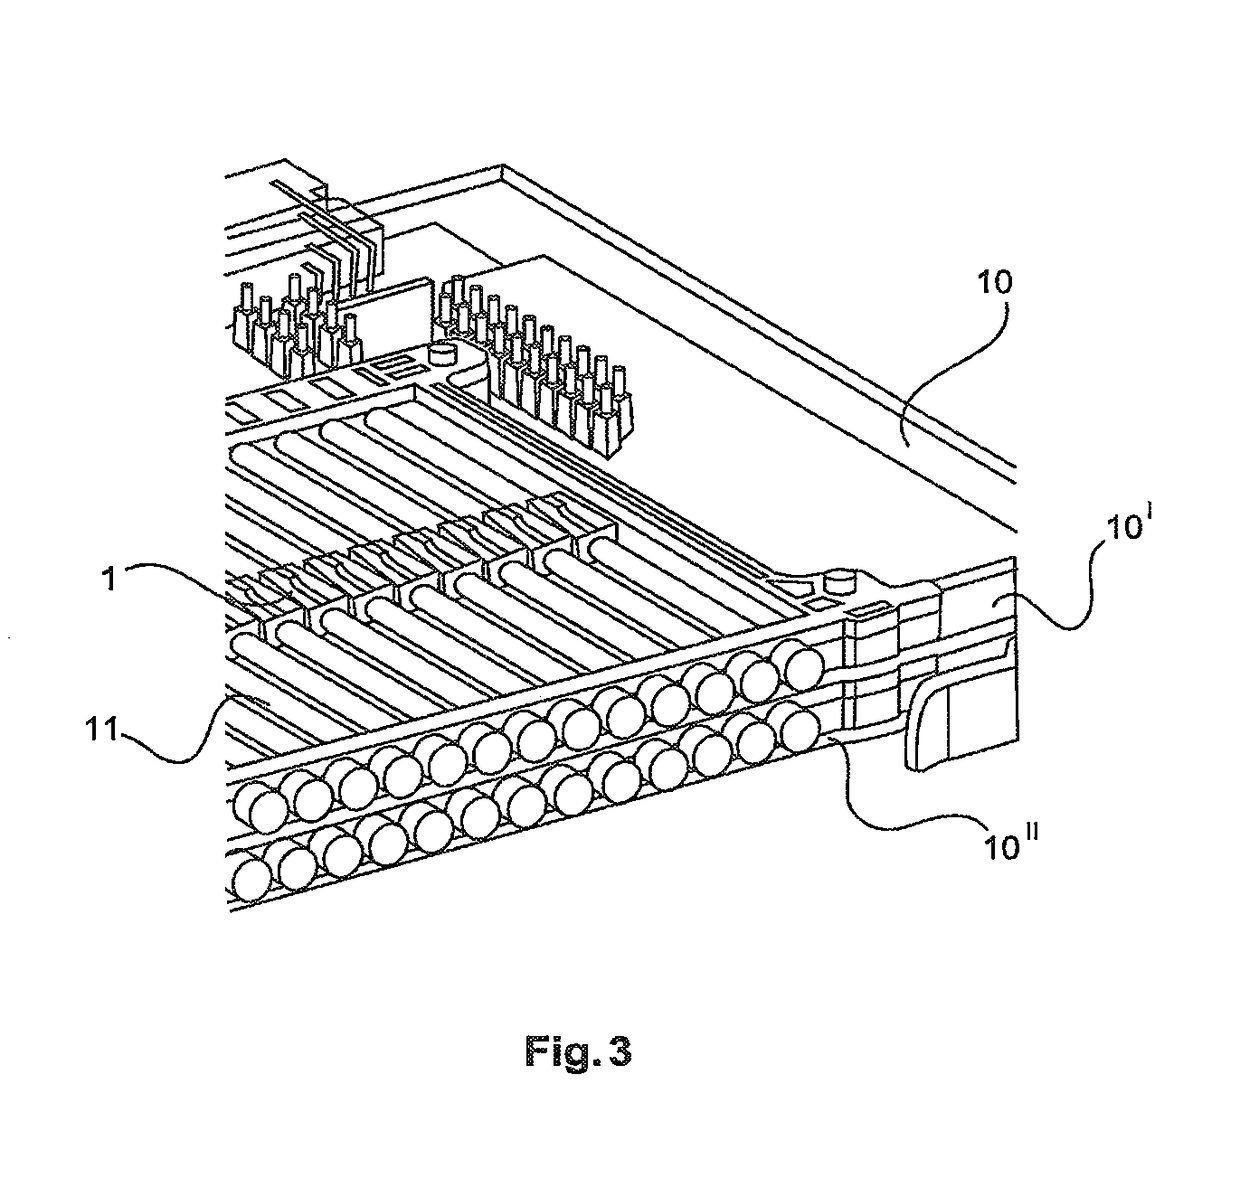 Sliding element for contacting printed circuit boards